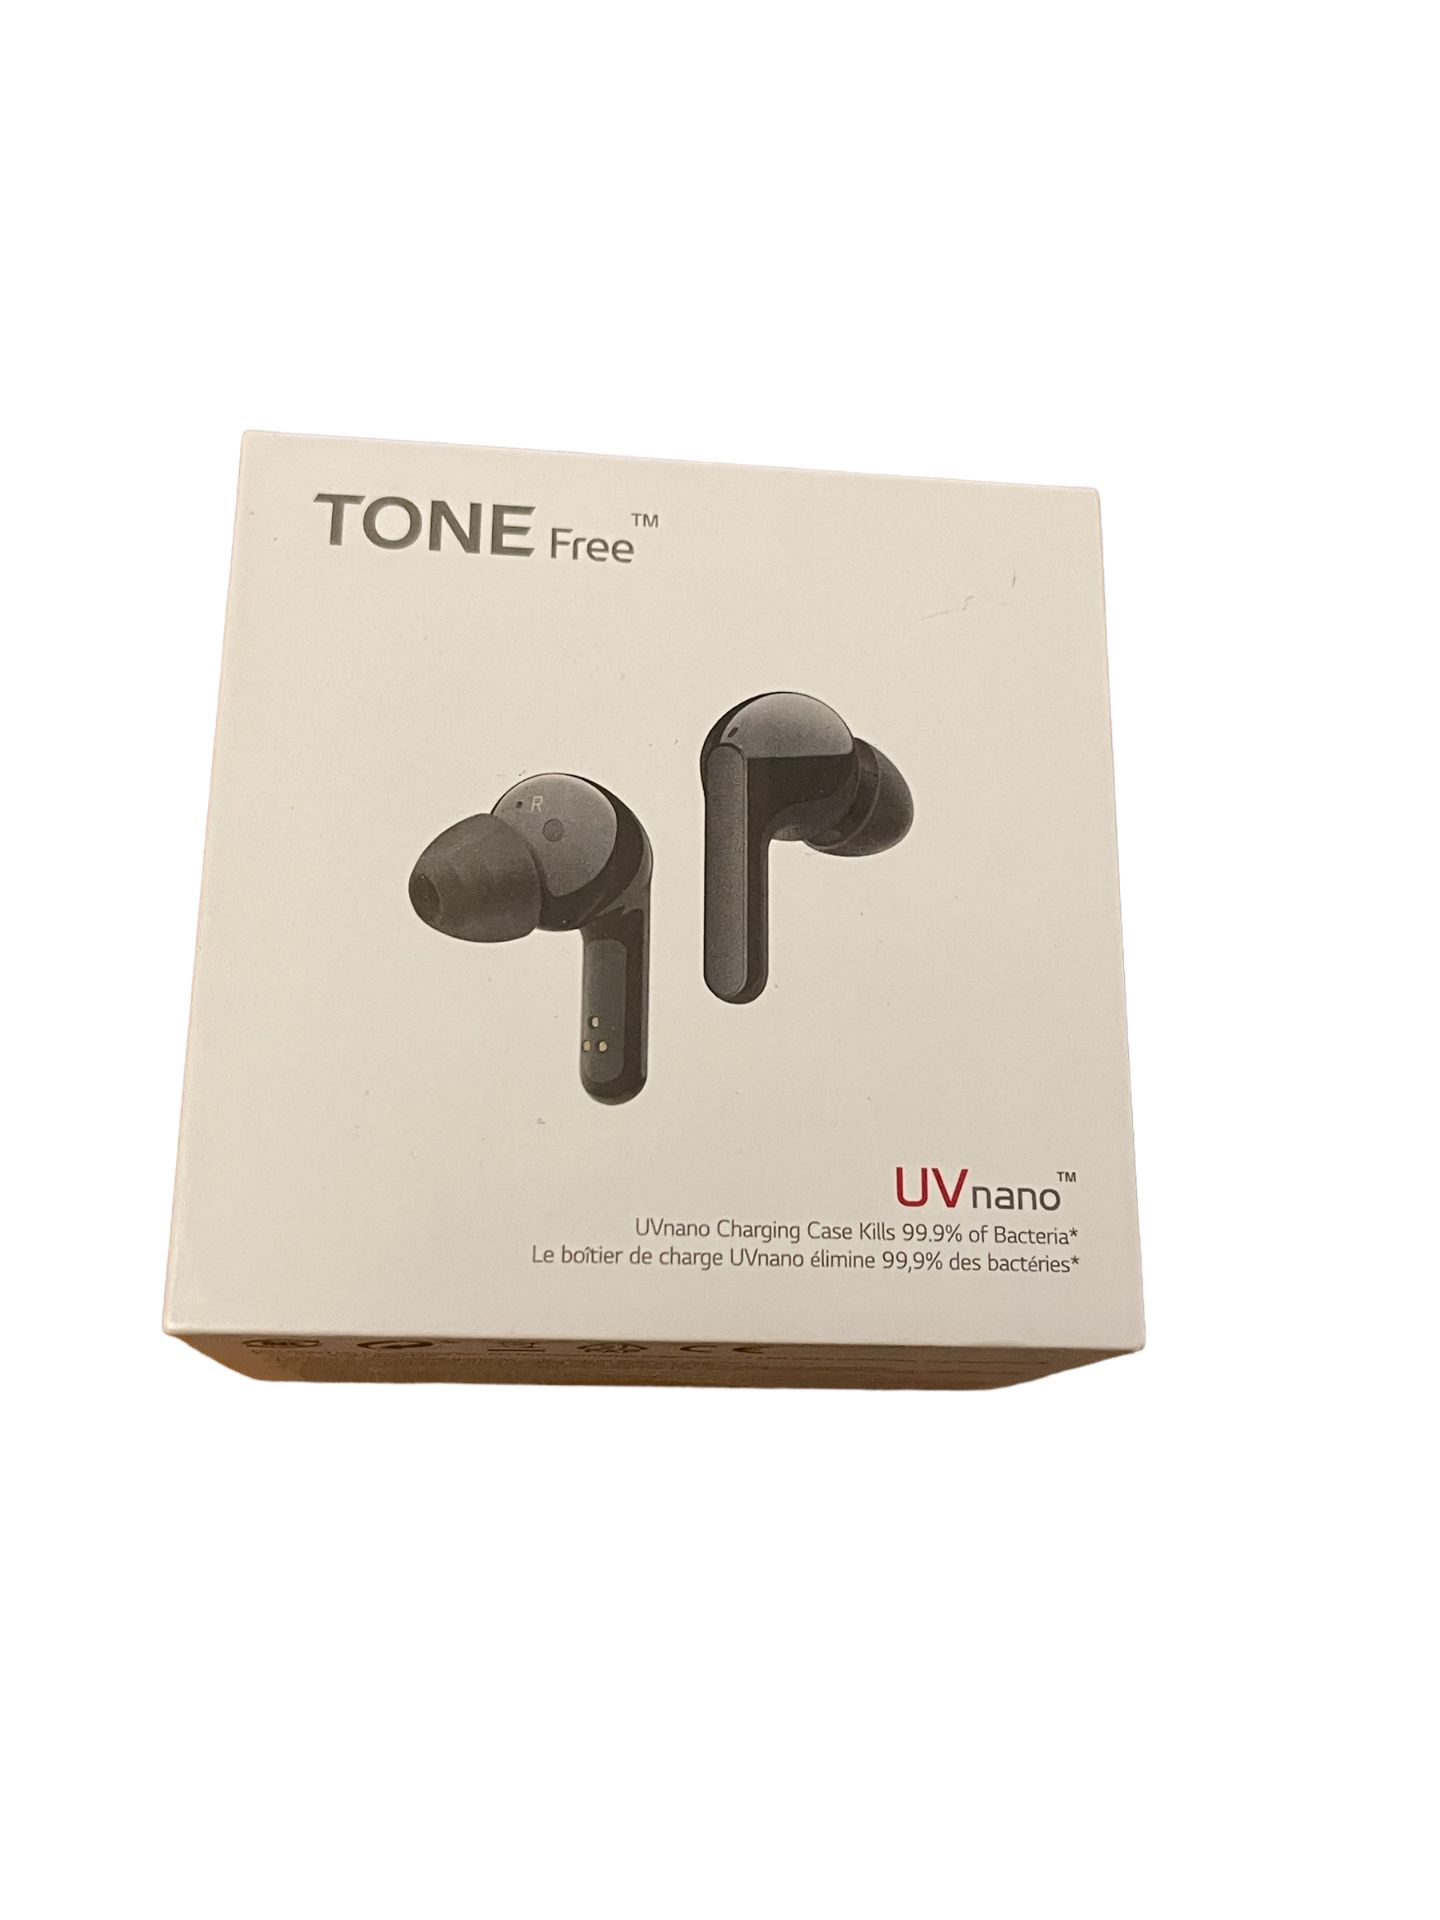 LG HBS-FN6 TONE Free True Wireless In-Ear Headphones (Black) tone free AirPods with papers - Image 6 of 6